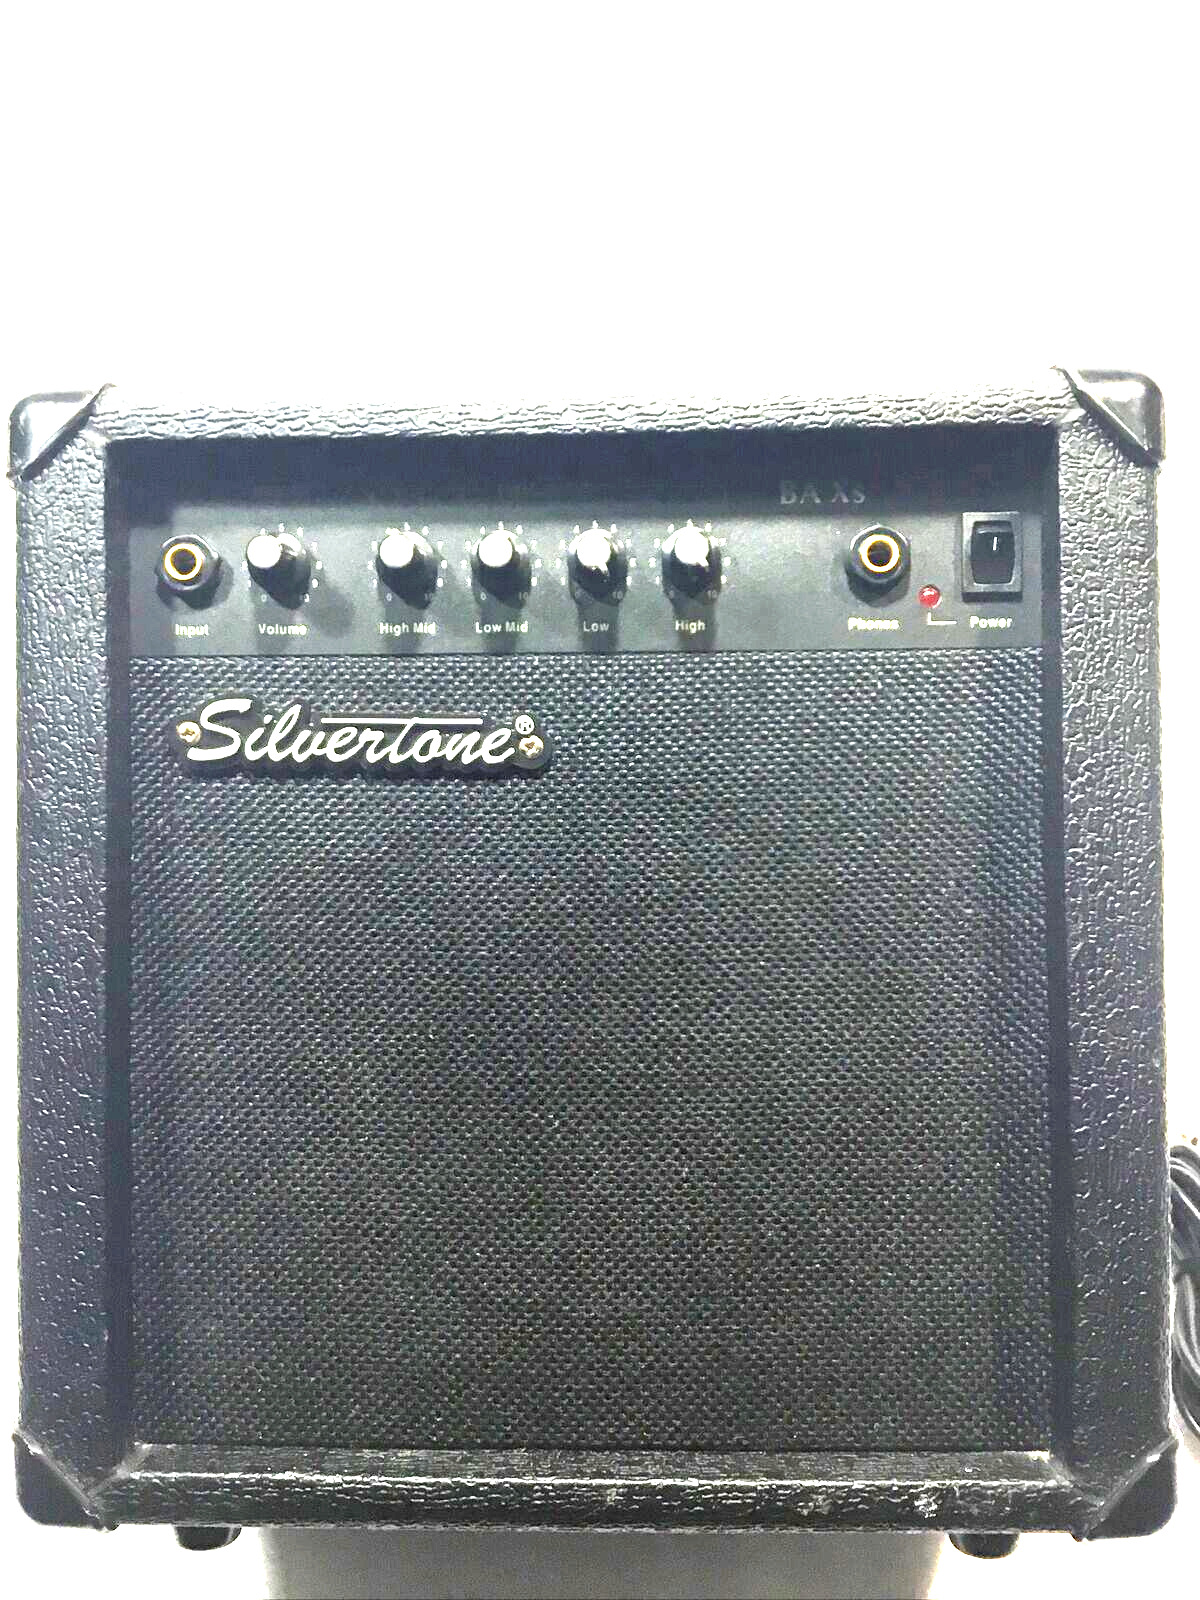 VTG Bass Guitar Silverstone BA XS Combo Amplifier Commercial Audio Systeme Works